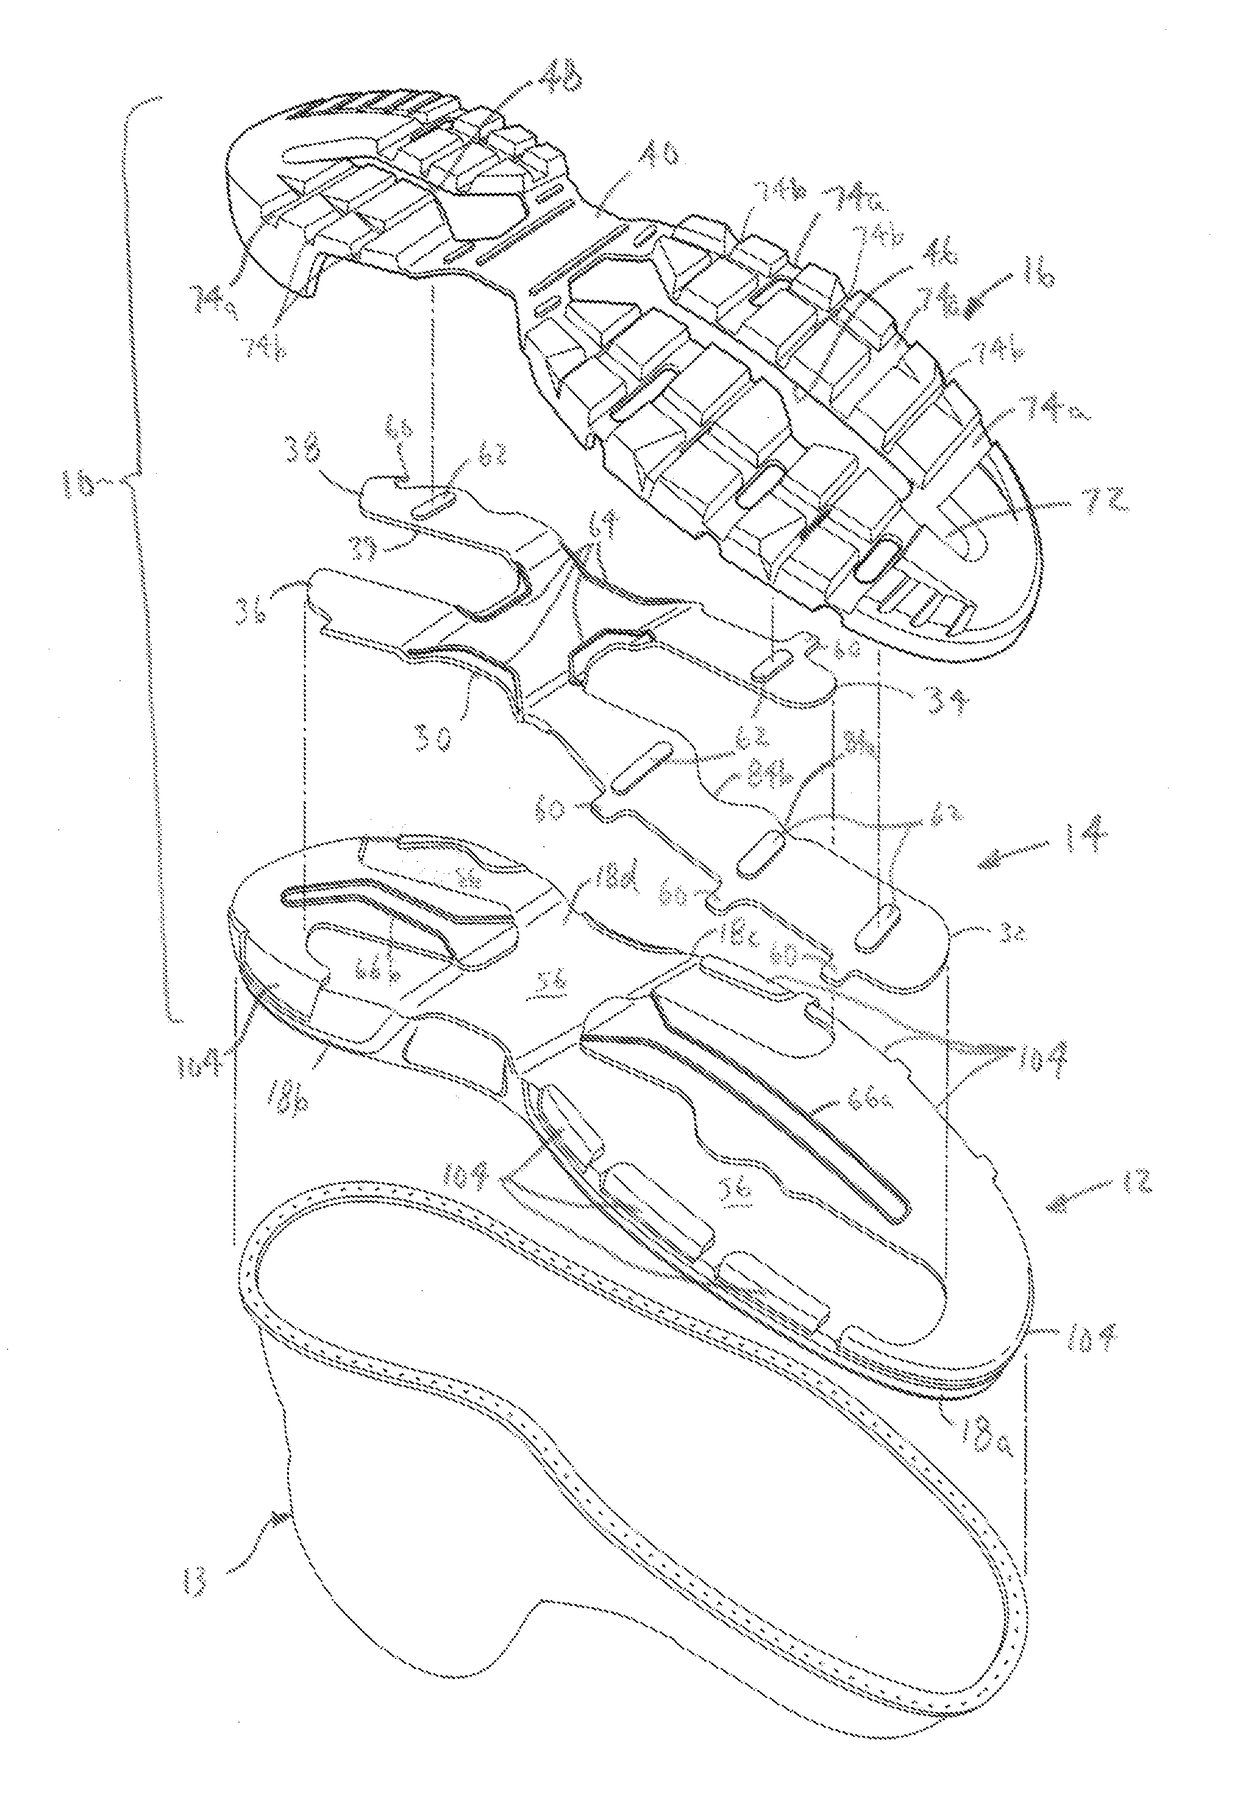 Sole assembly for article of footwear